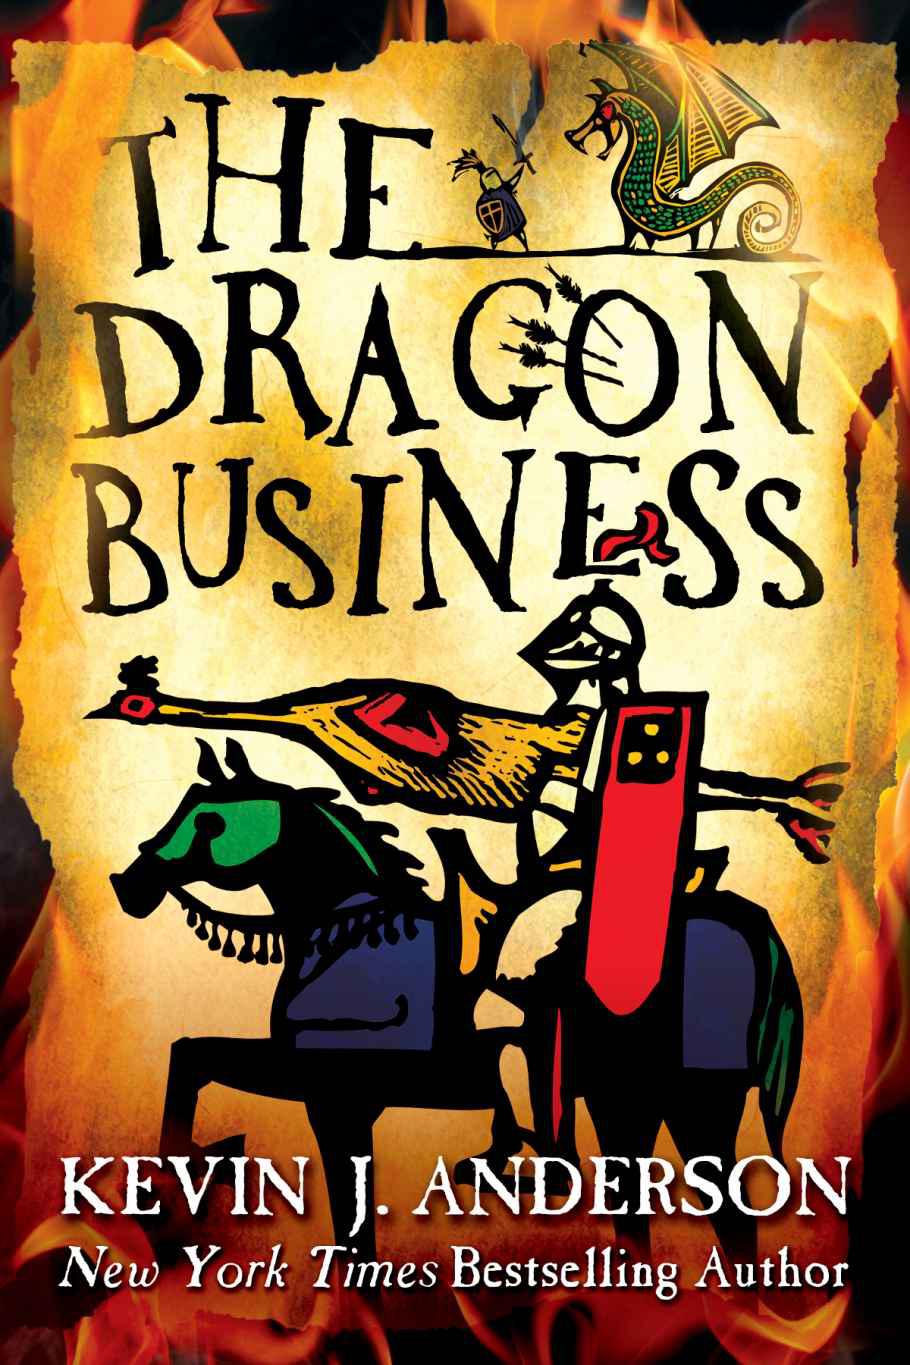 Dragon Business, The by Kevin J. Anderson